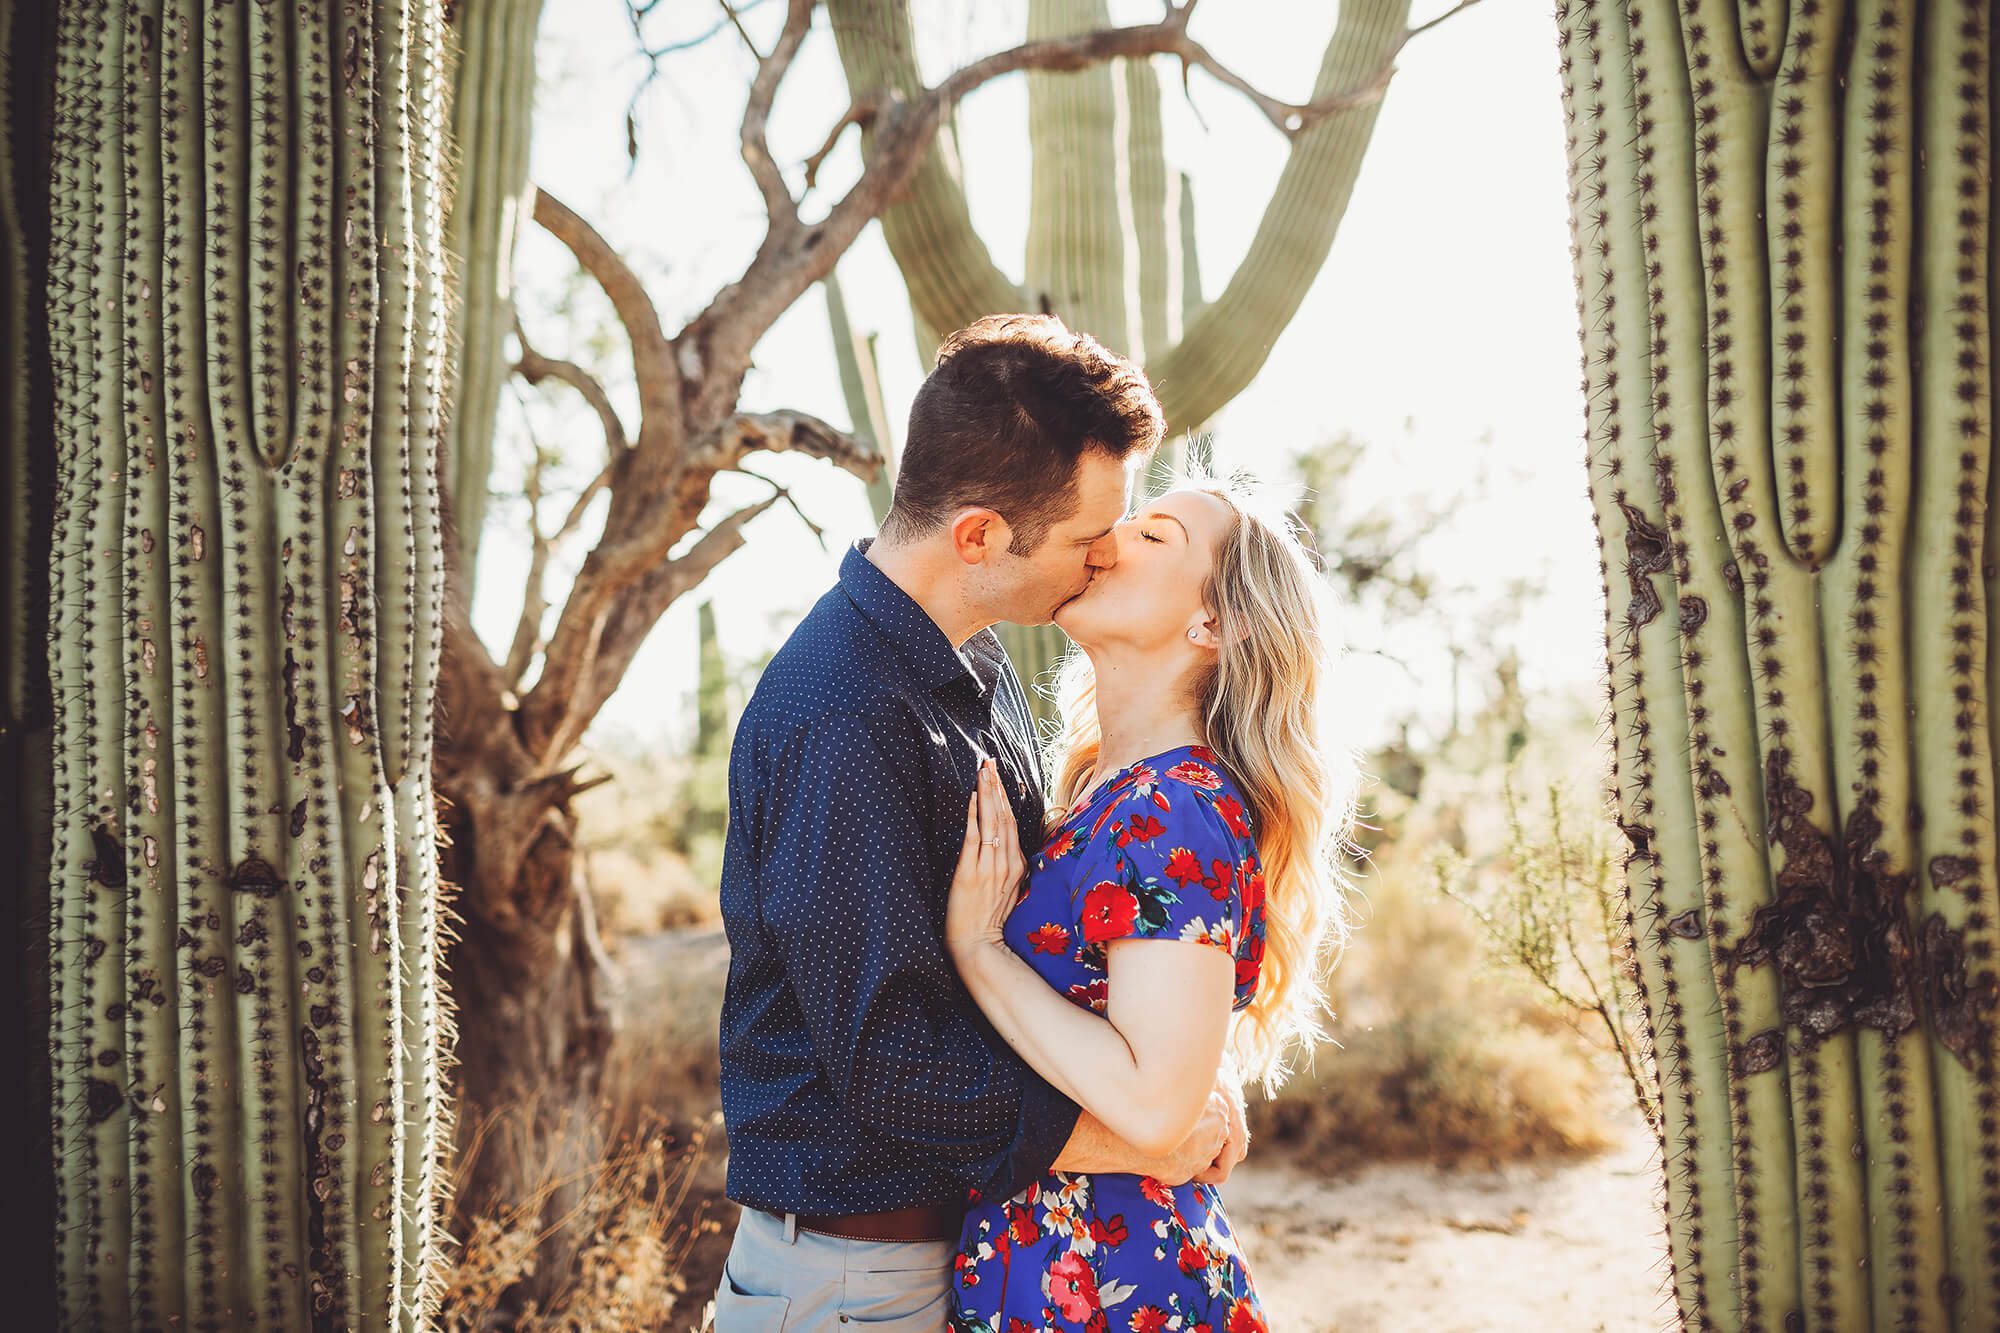 Shaun and Ally embrace surrounded by sunlight during their couple's session with Tucson couple's photographer Belle Vie Photography